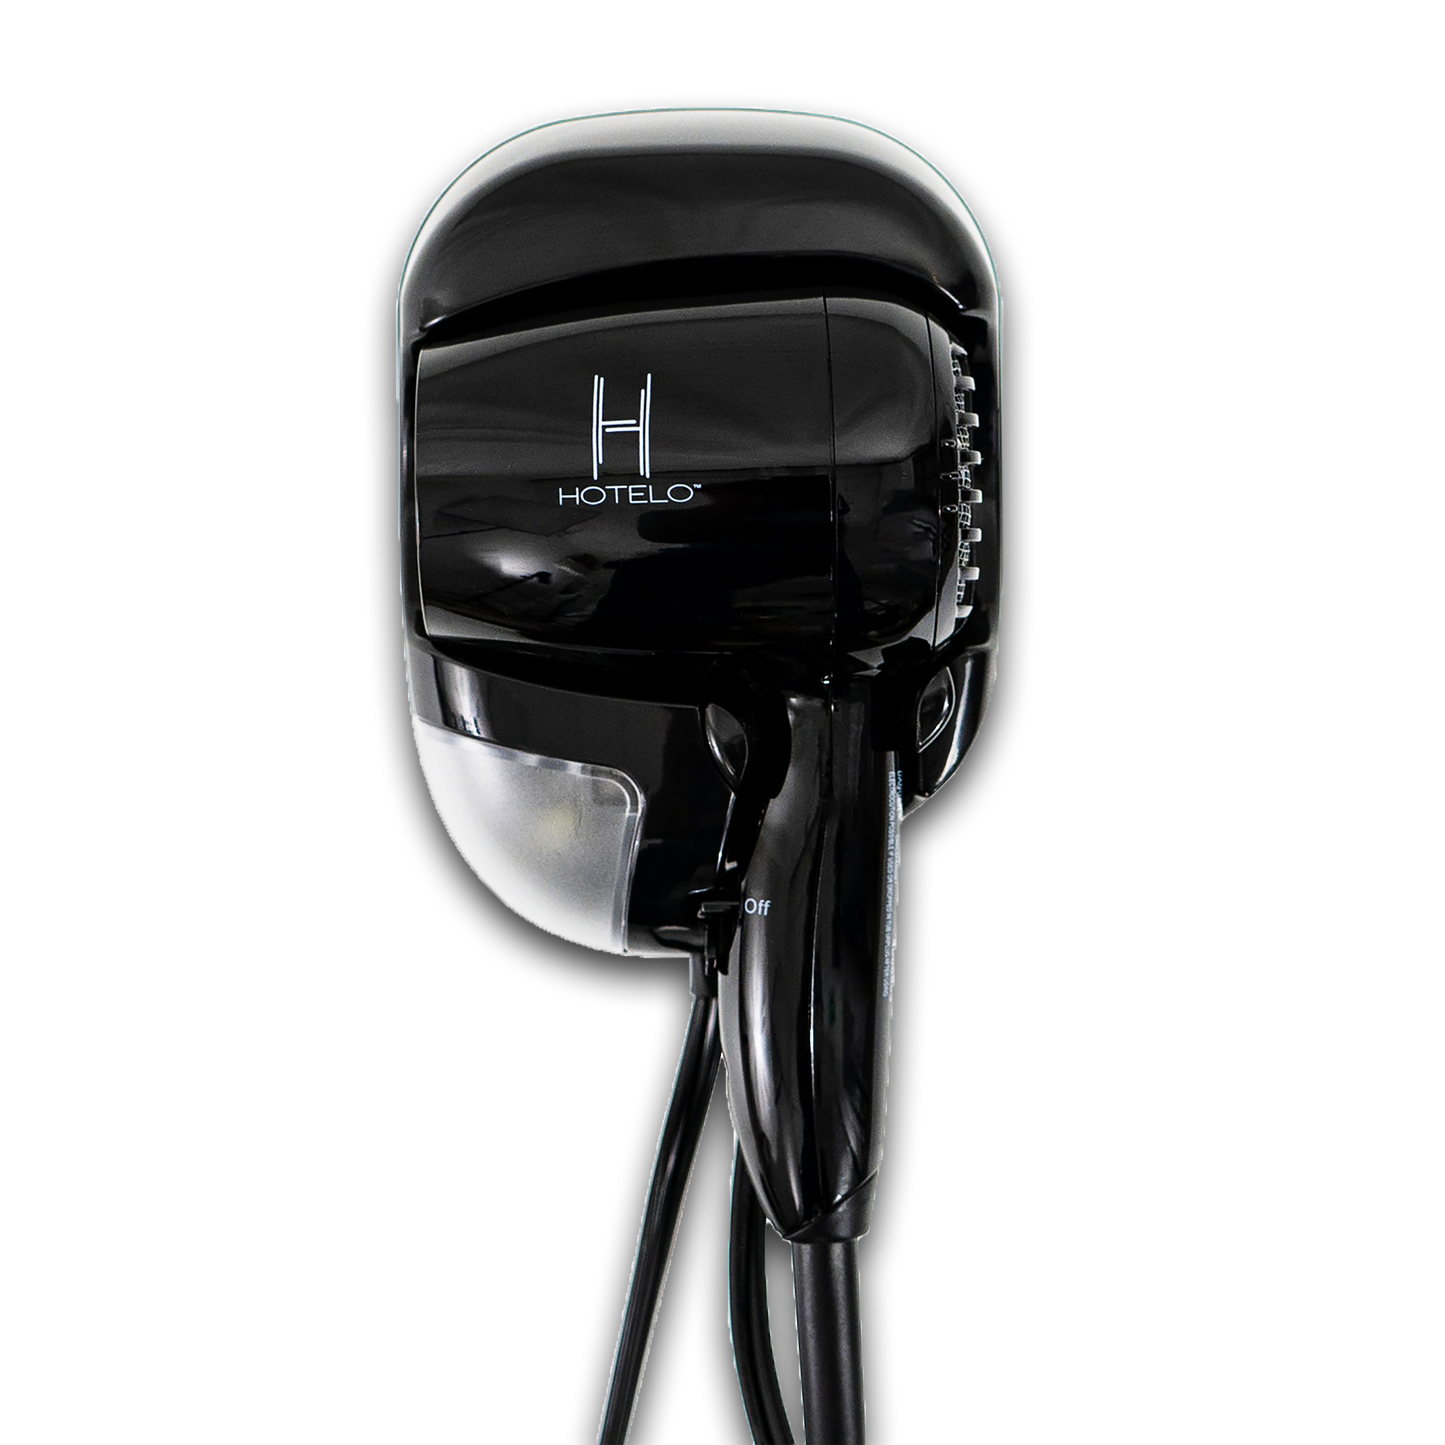 HAIR DRYER WITH LIGHT/WALL MOUNTABLE